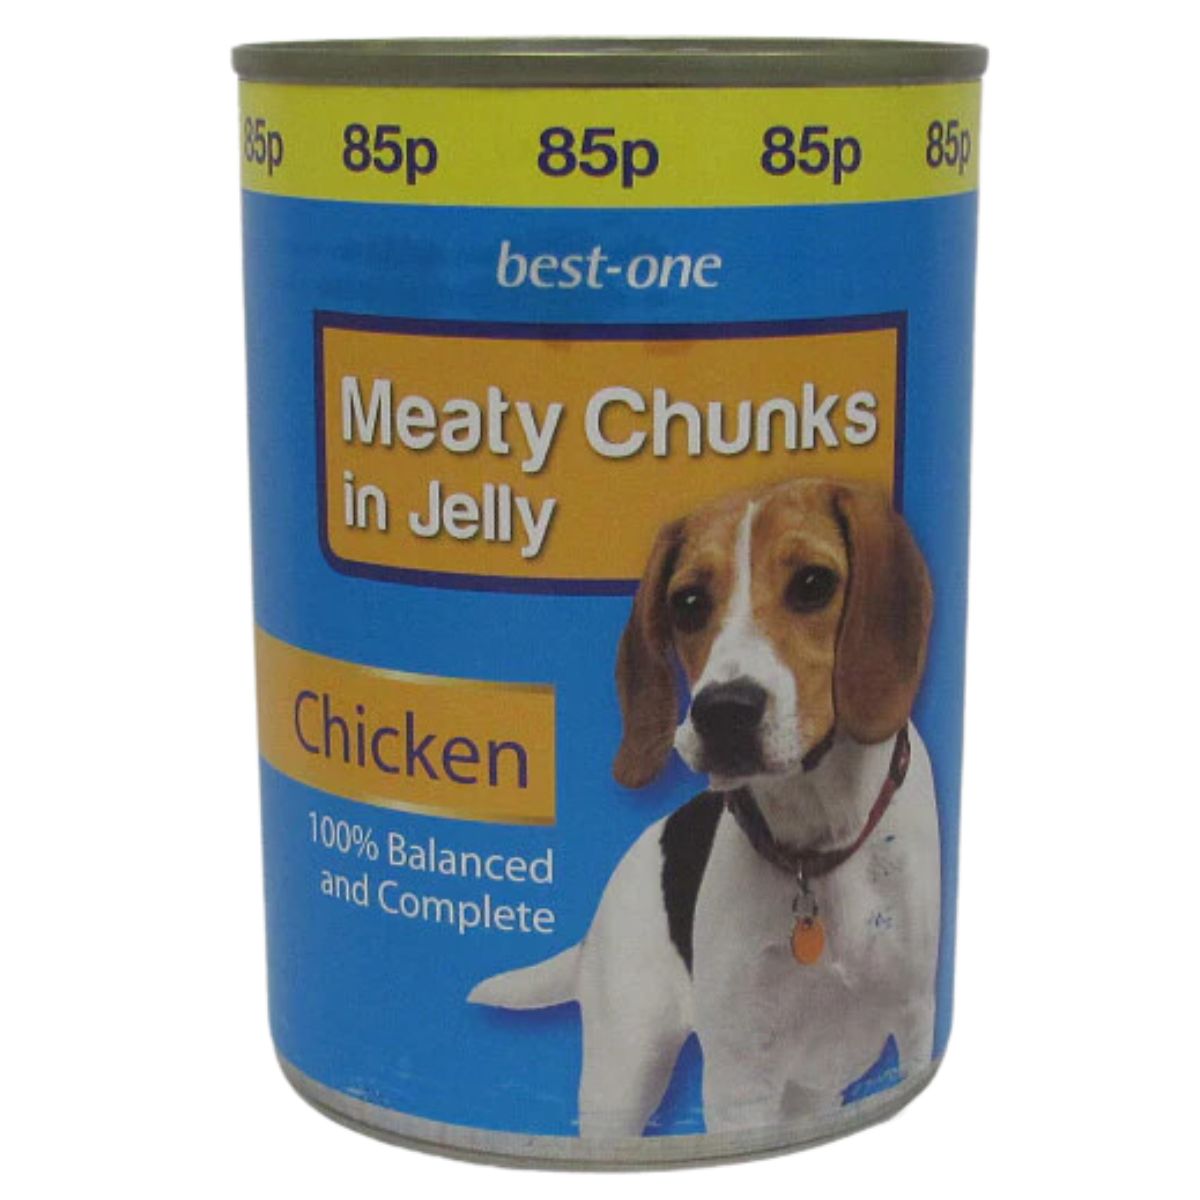 Can of Best One - Meaty Chunks in Jelly Chicken - 400g featuring meaty chunks in jelly with chicken flavor, displaying a beagle on the label.